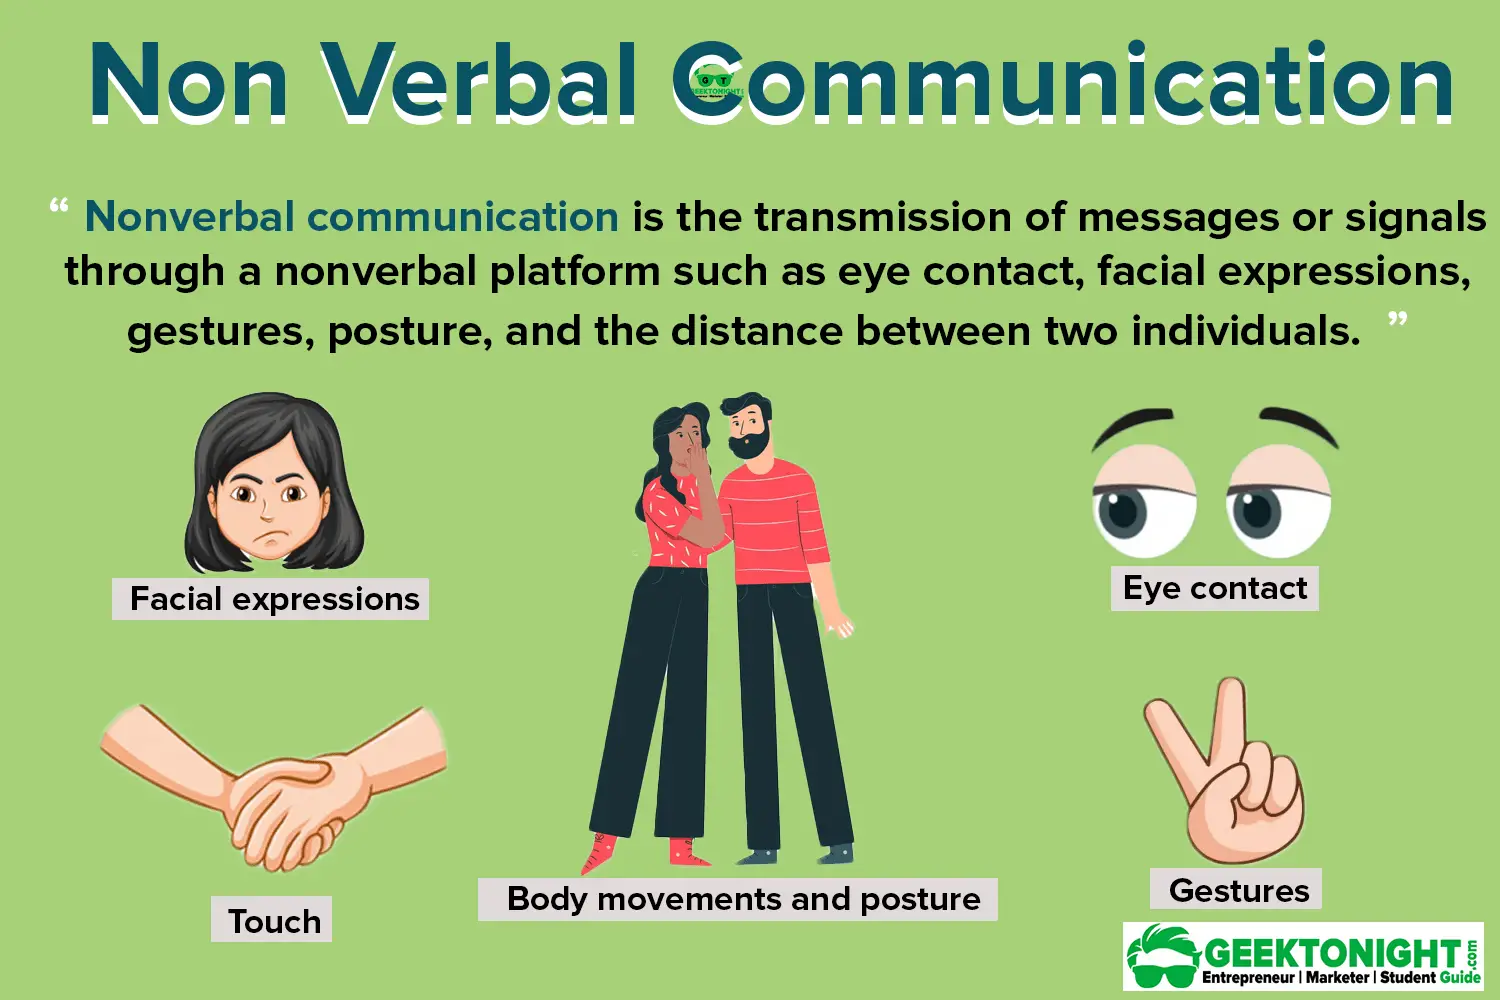 Pictures of verbal communication